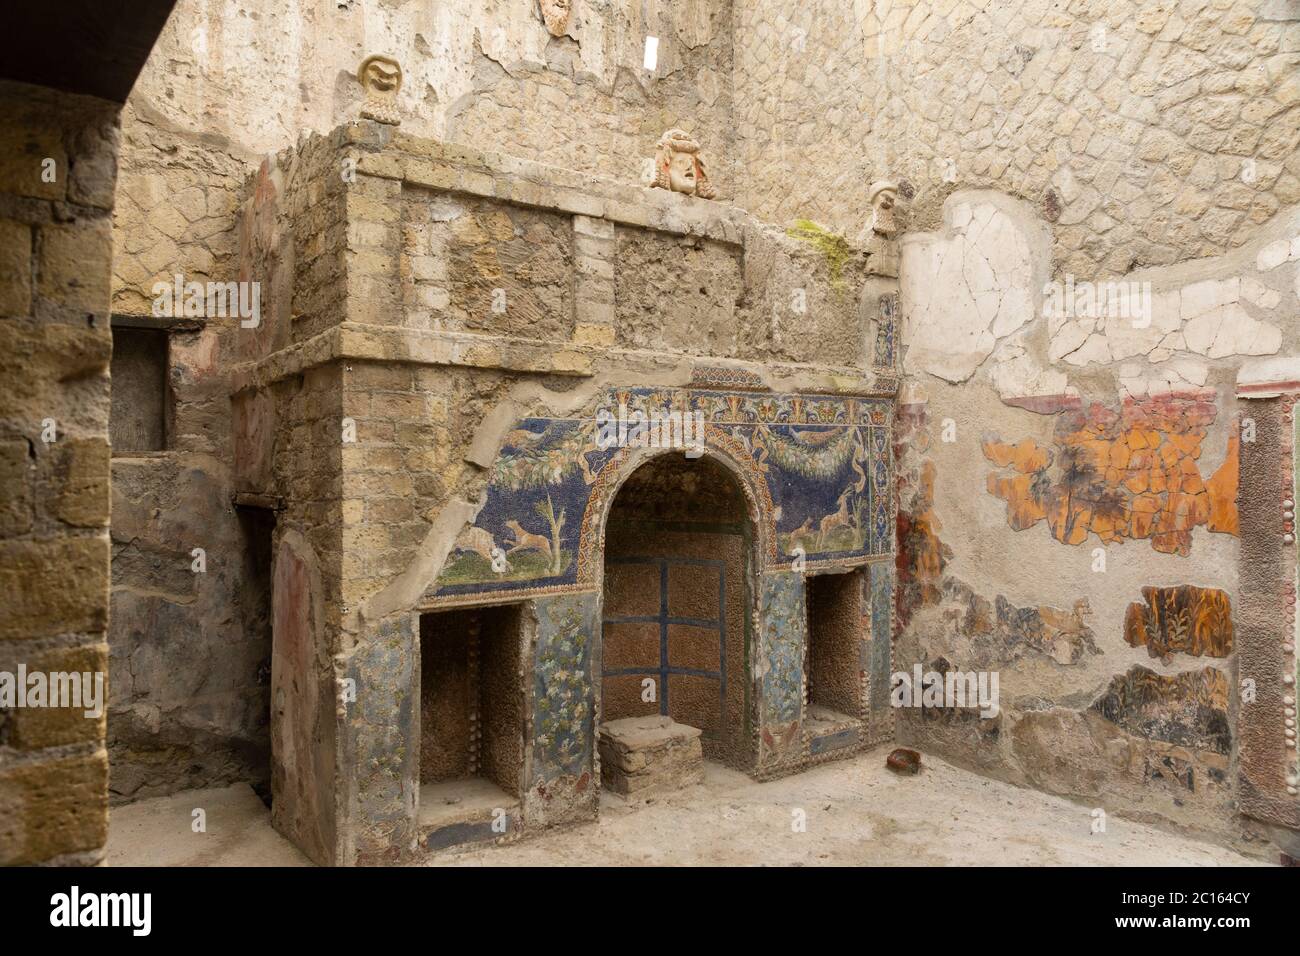 The colourful mosaics of the Nymphaeum - an artifical grotto and fountain - in the garden of the House of the Neptune Mosaic. Herculaneum, Italy Stock Photo